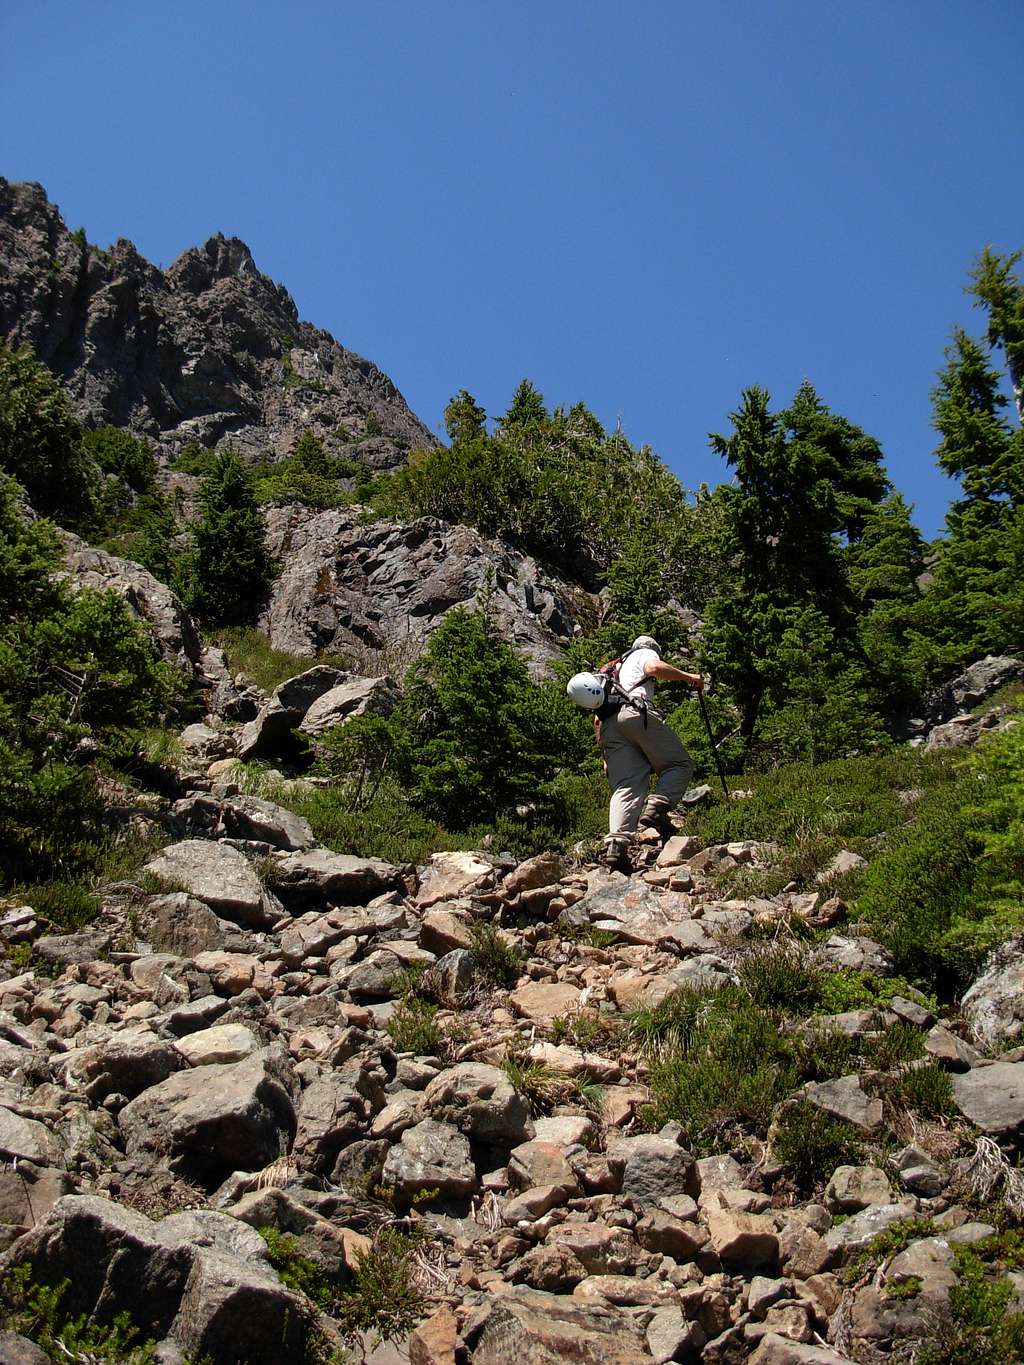 Section #4: Ascending From Meadow Basin